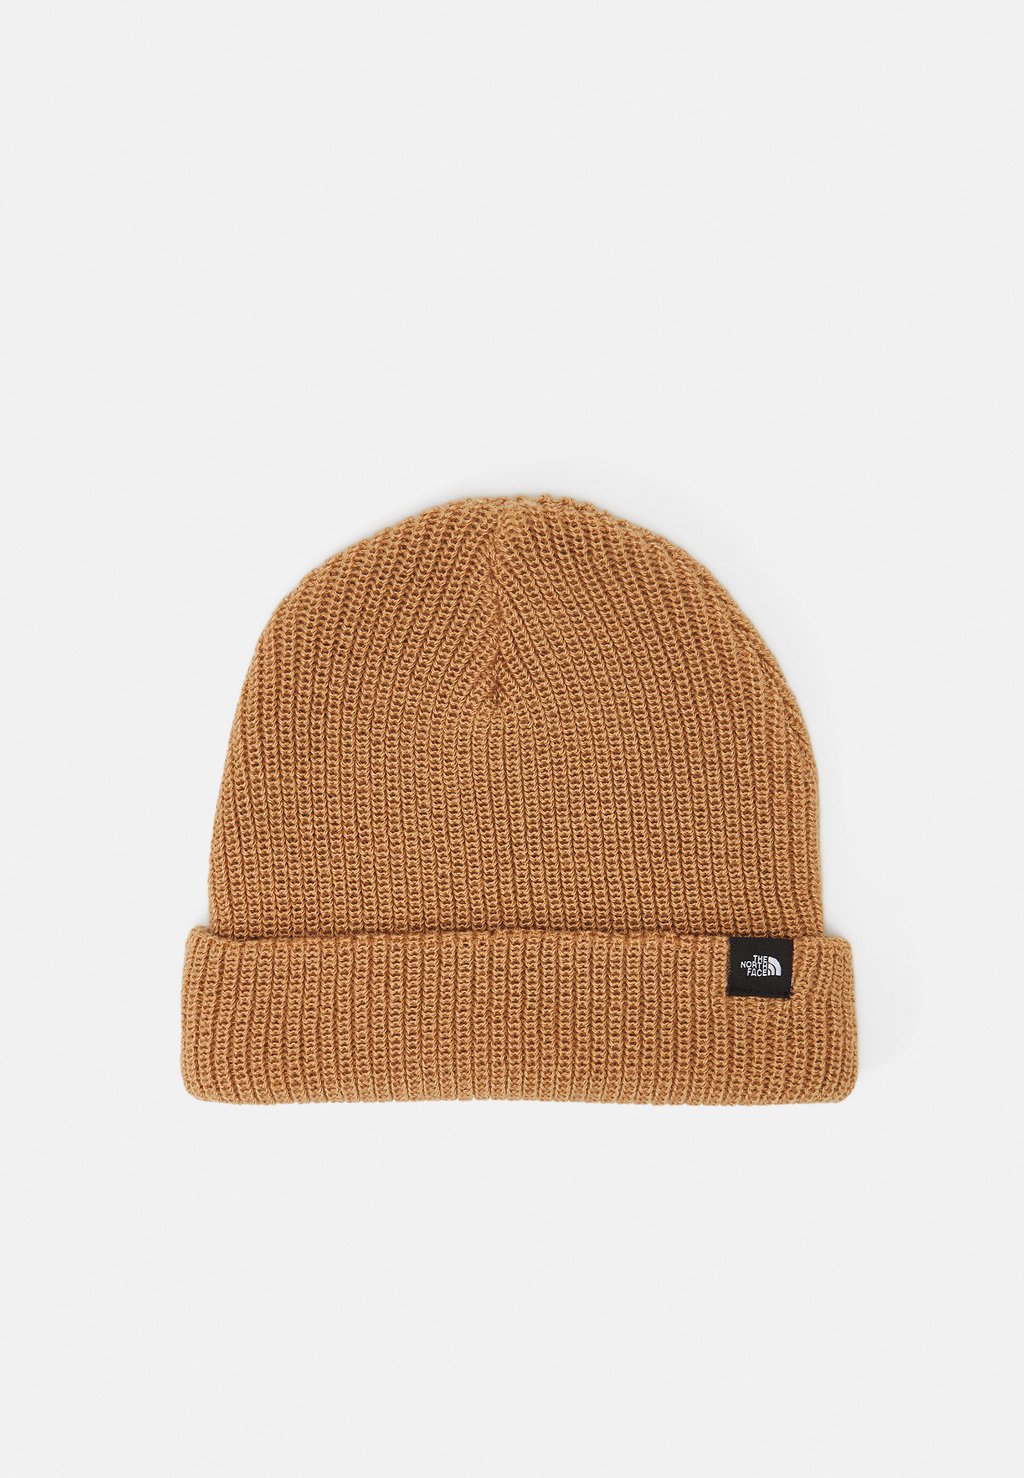 Шапка The North Face URBAN SWITCH BEANIE UNISEX, цвет almond butter